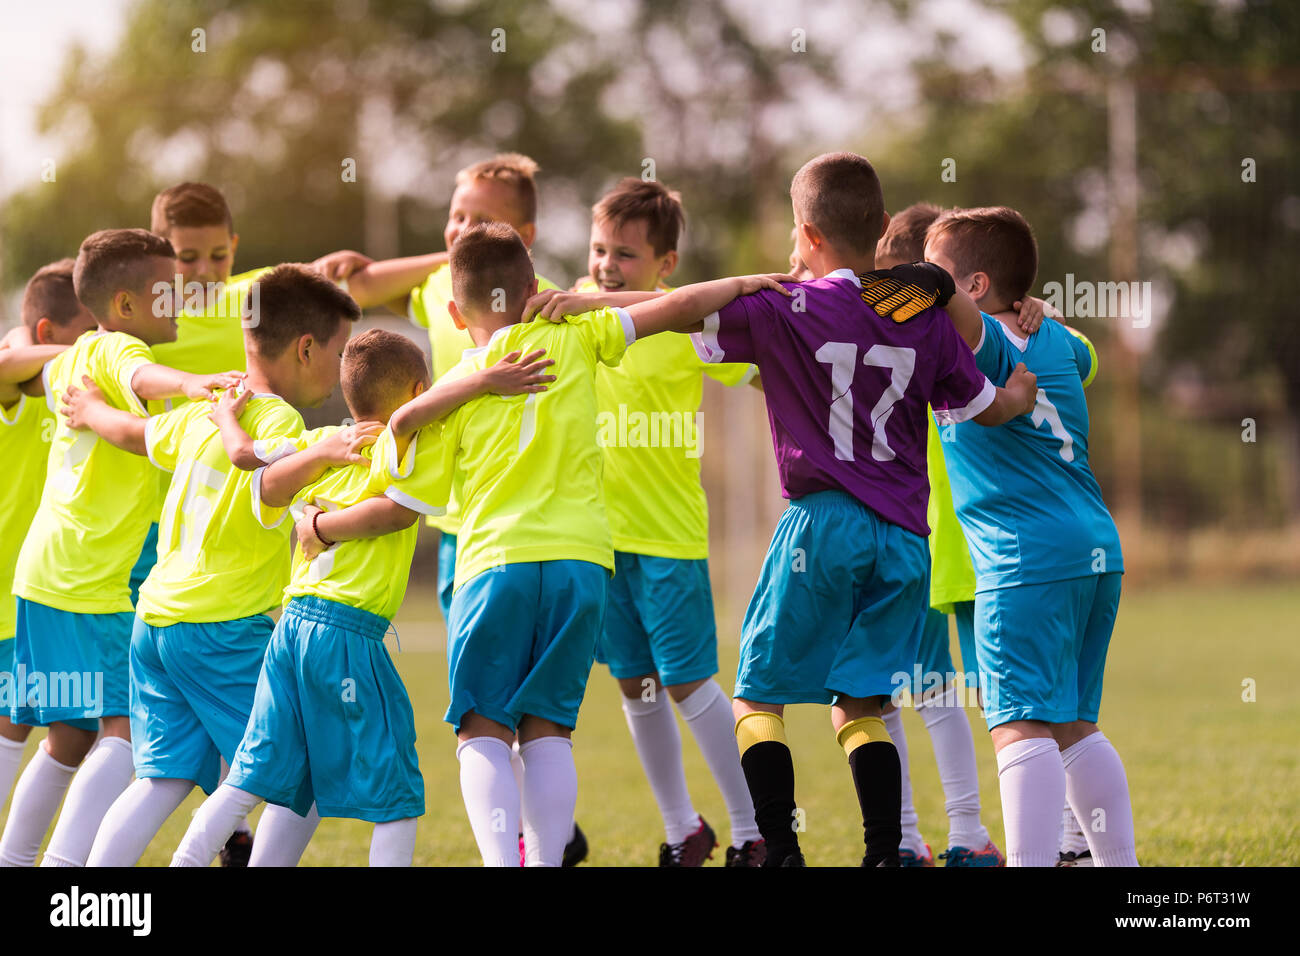 Kids soccer football - young children players celebrating in hug after victory Stock Photo